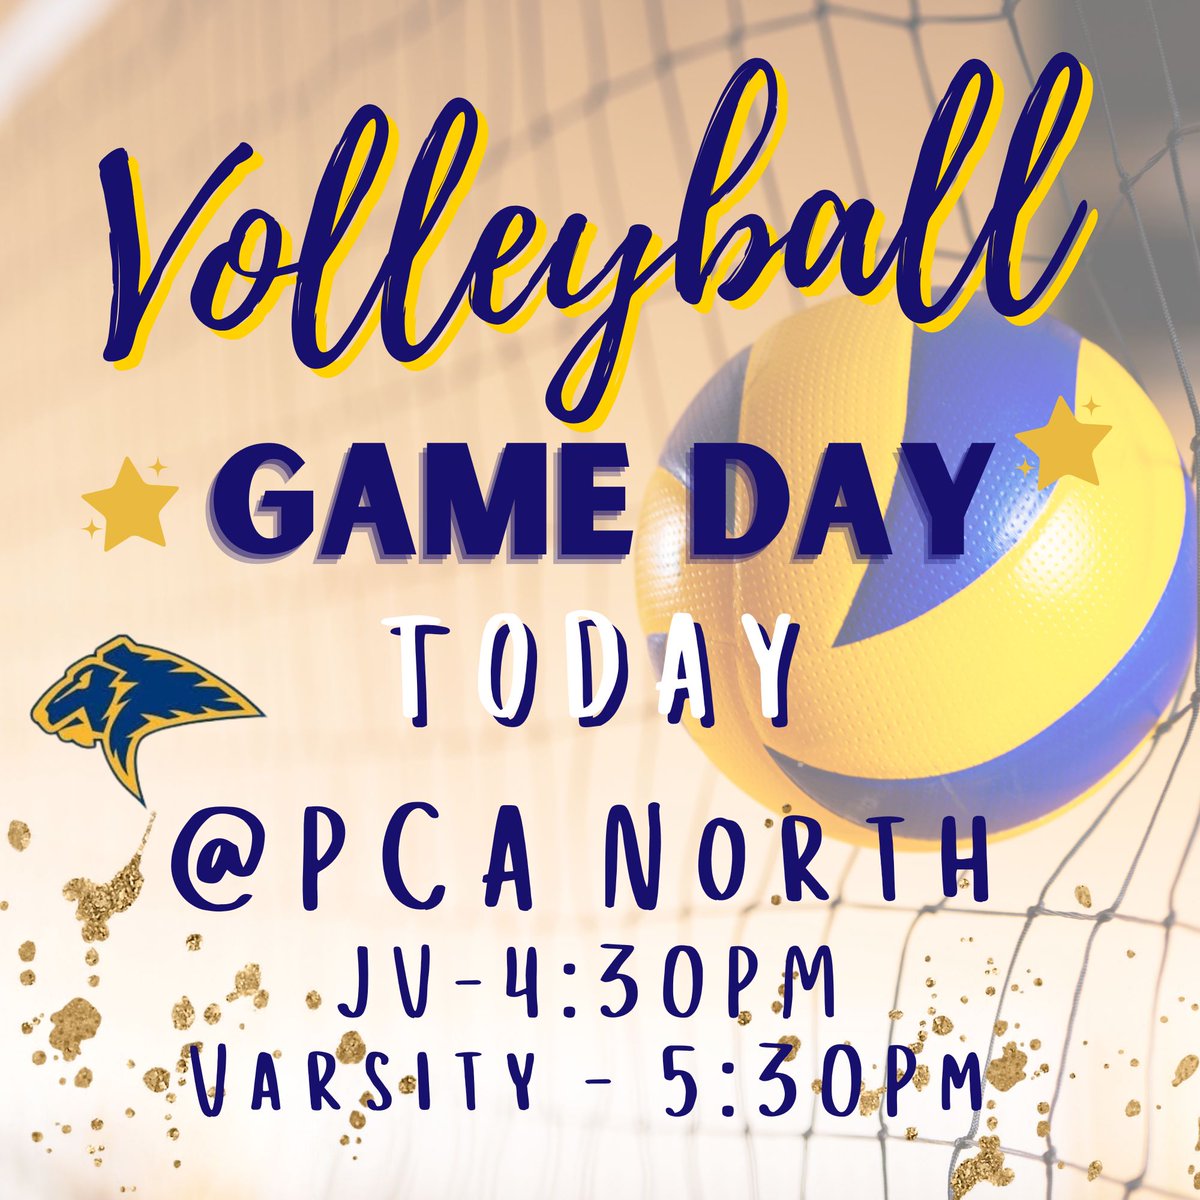 Come out and cheer on our lady lions! It's GAME DAY! #pcanorth